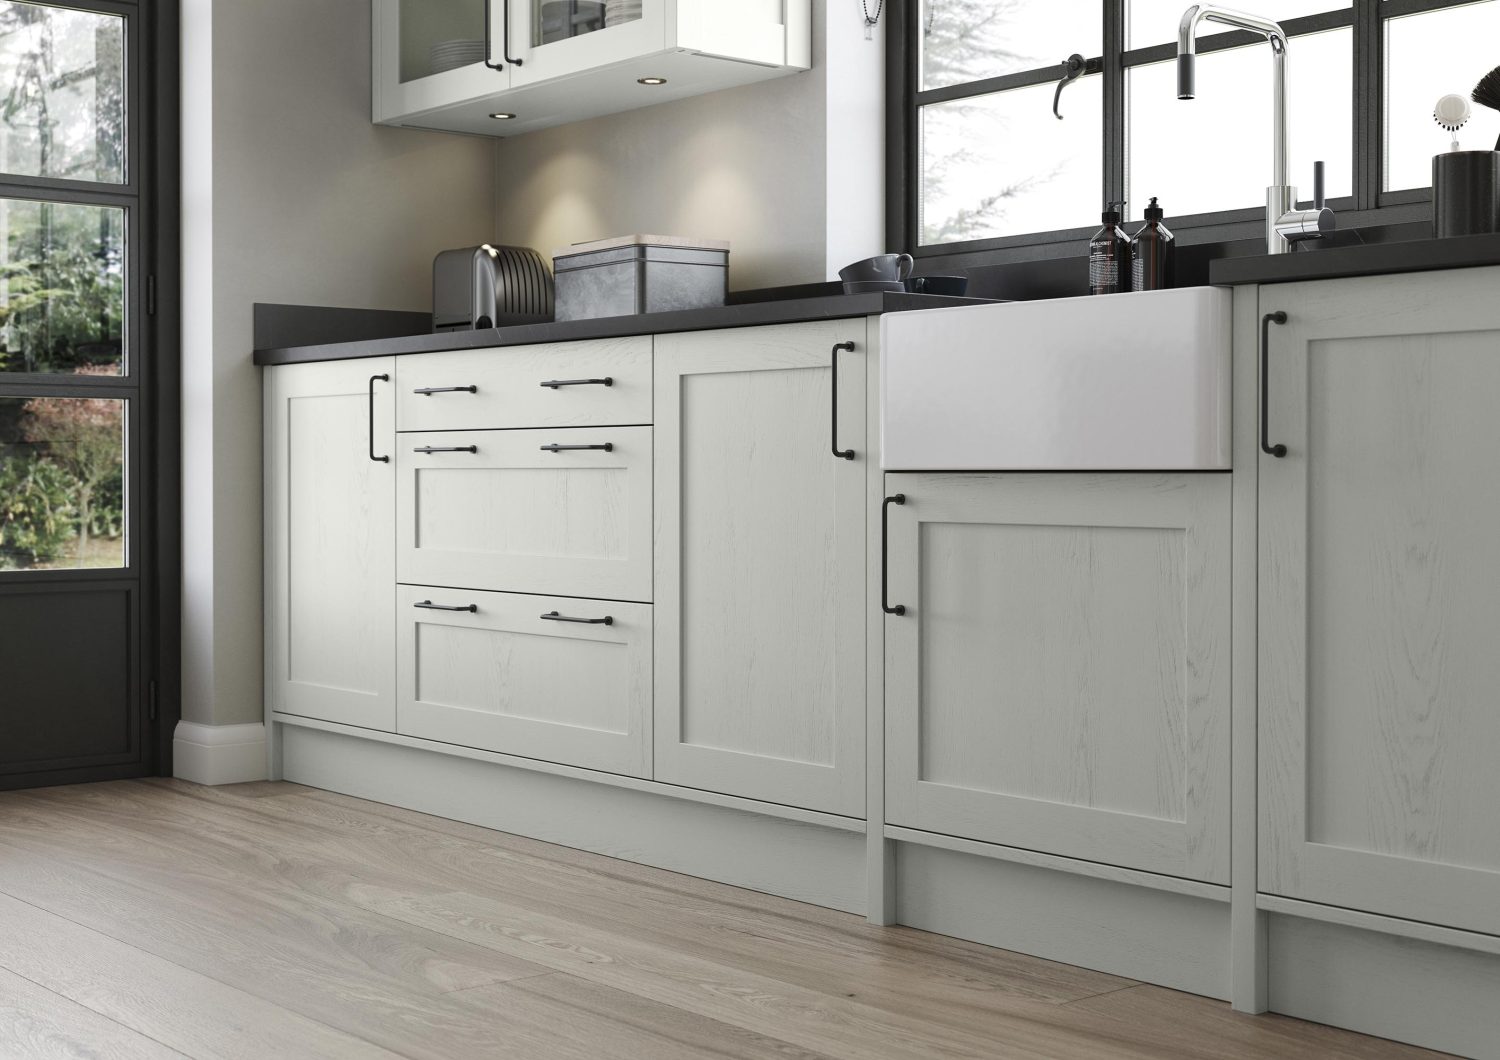 Alana Deep Heather and Light Grey shaker kitchen design by The Kitchen Depot, run of light grey cabinets and drawers under belfast sink